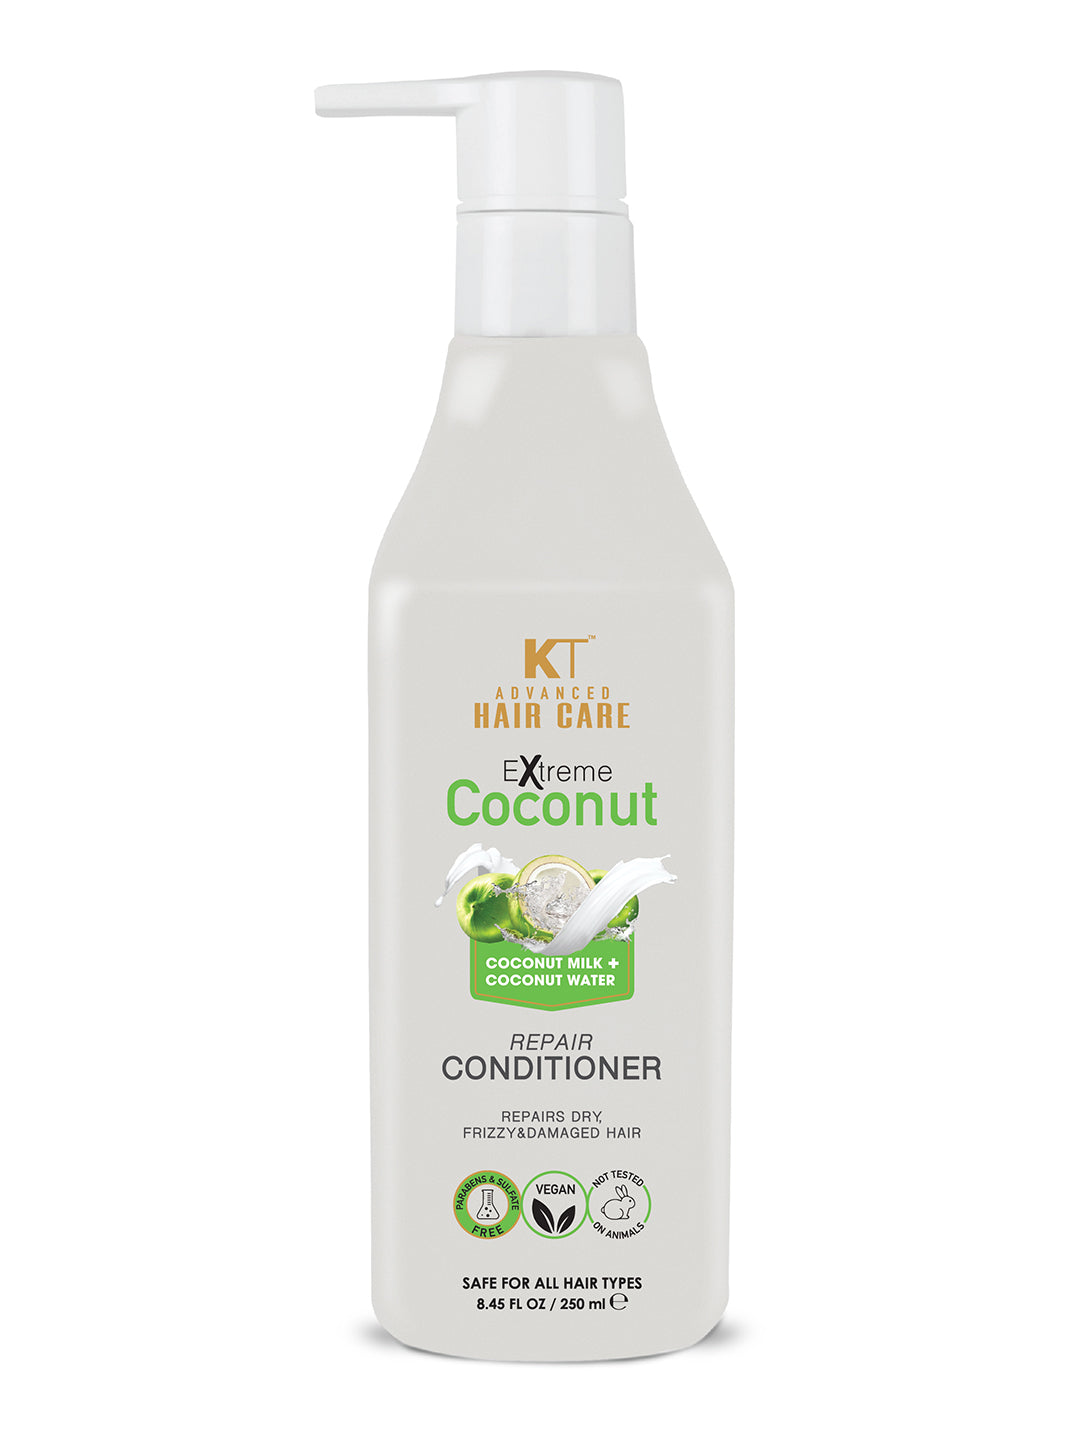 KT ADVANCED HAIR CARE EXTREME COCONUT REPAIR CONDITIONER -250 ML